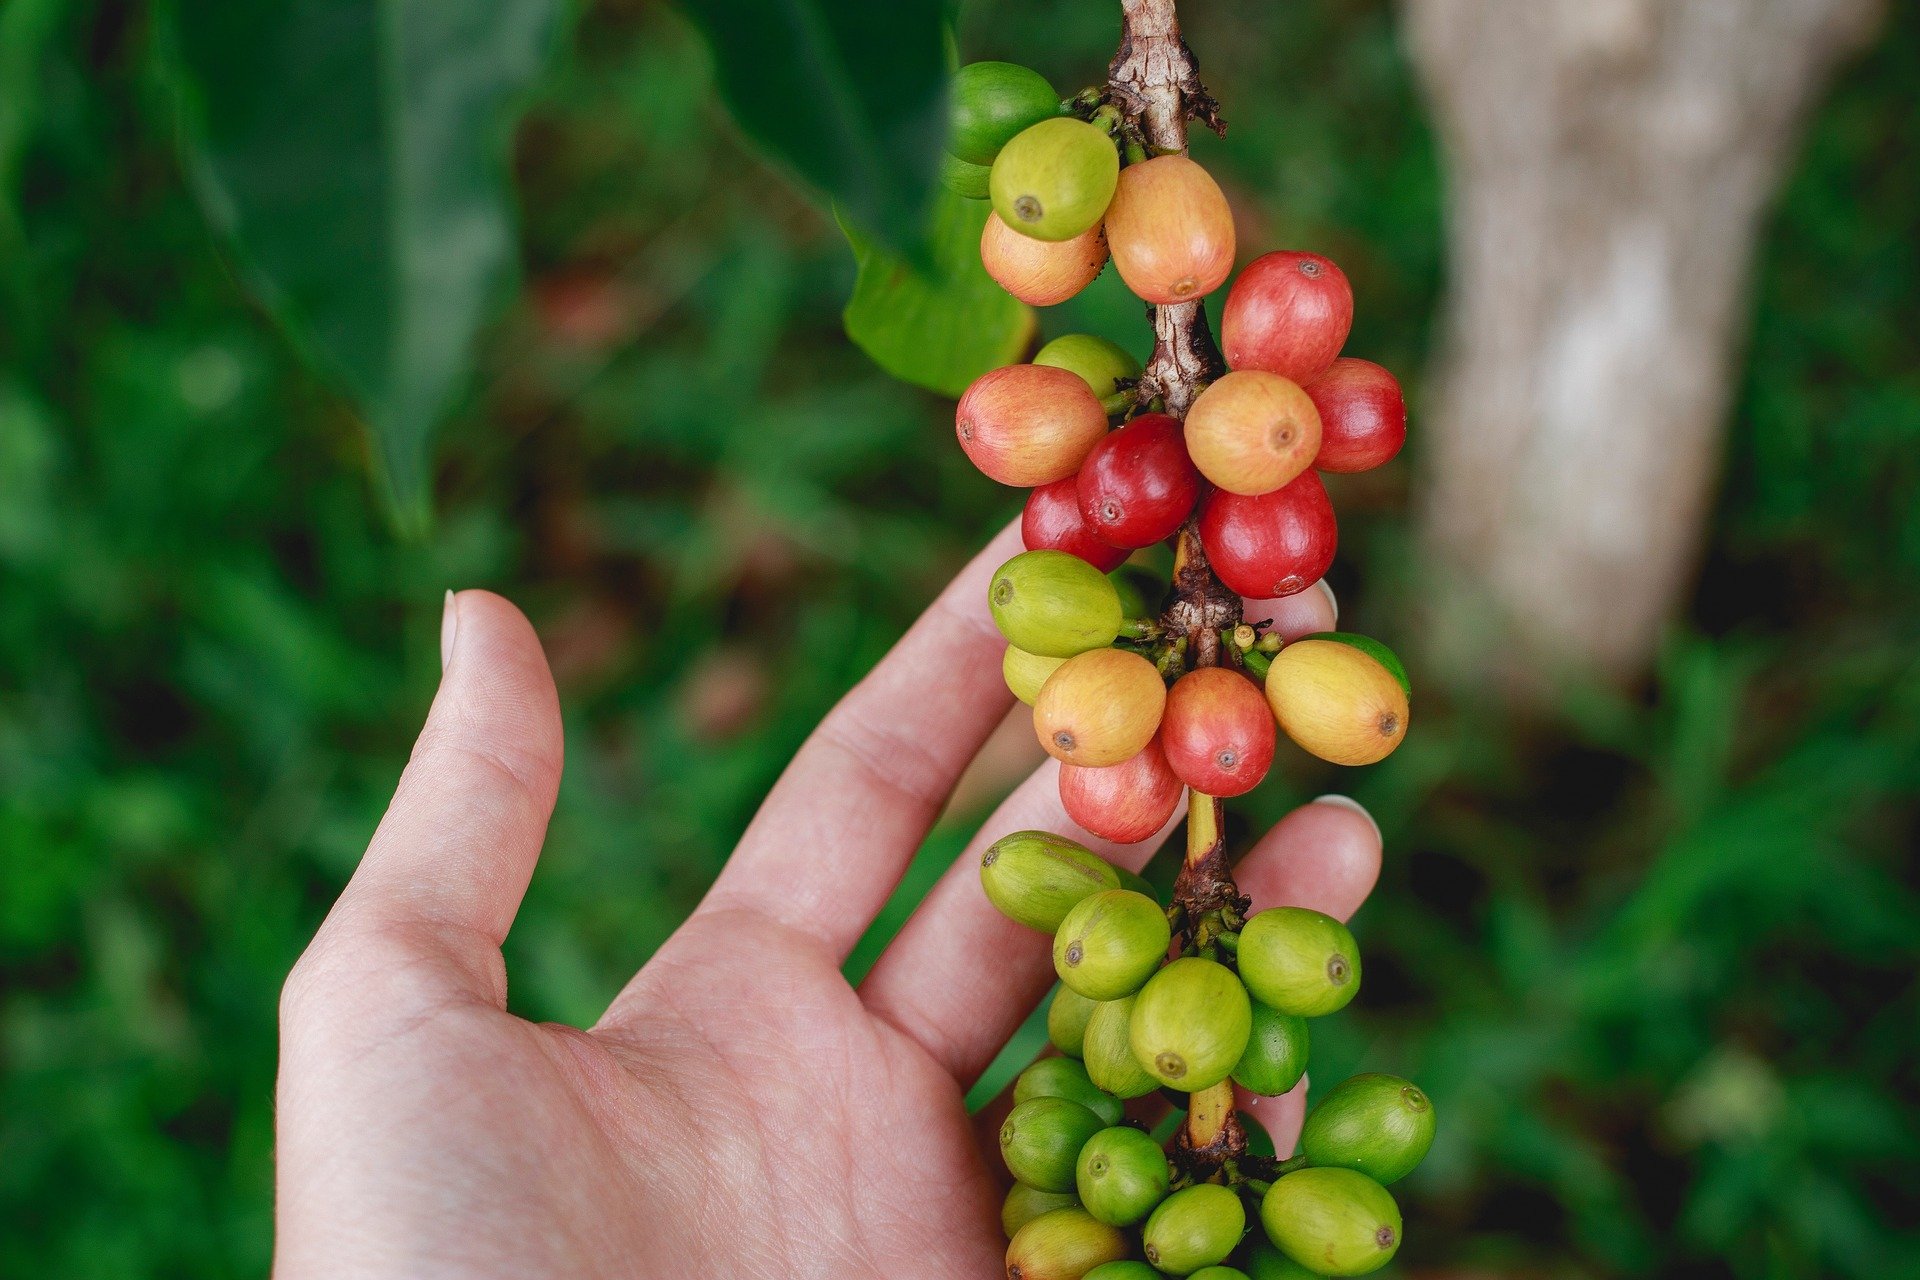 Symbiotic bacteria might have helped coffee plants adapt to climate change in the past.